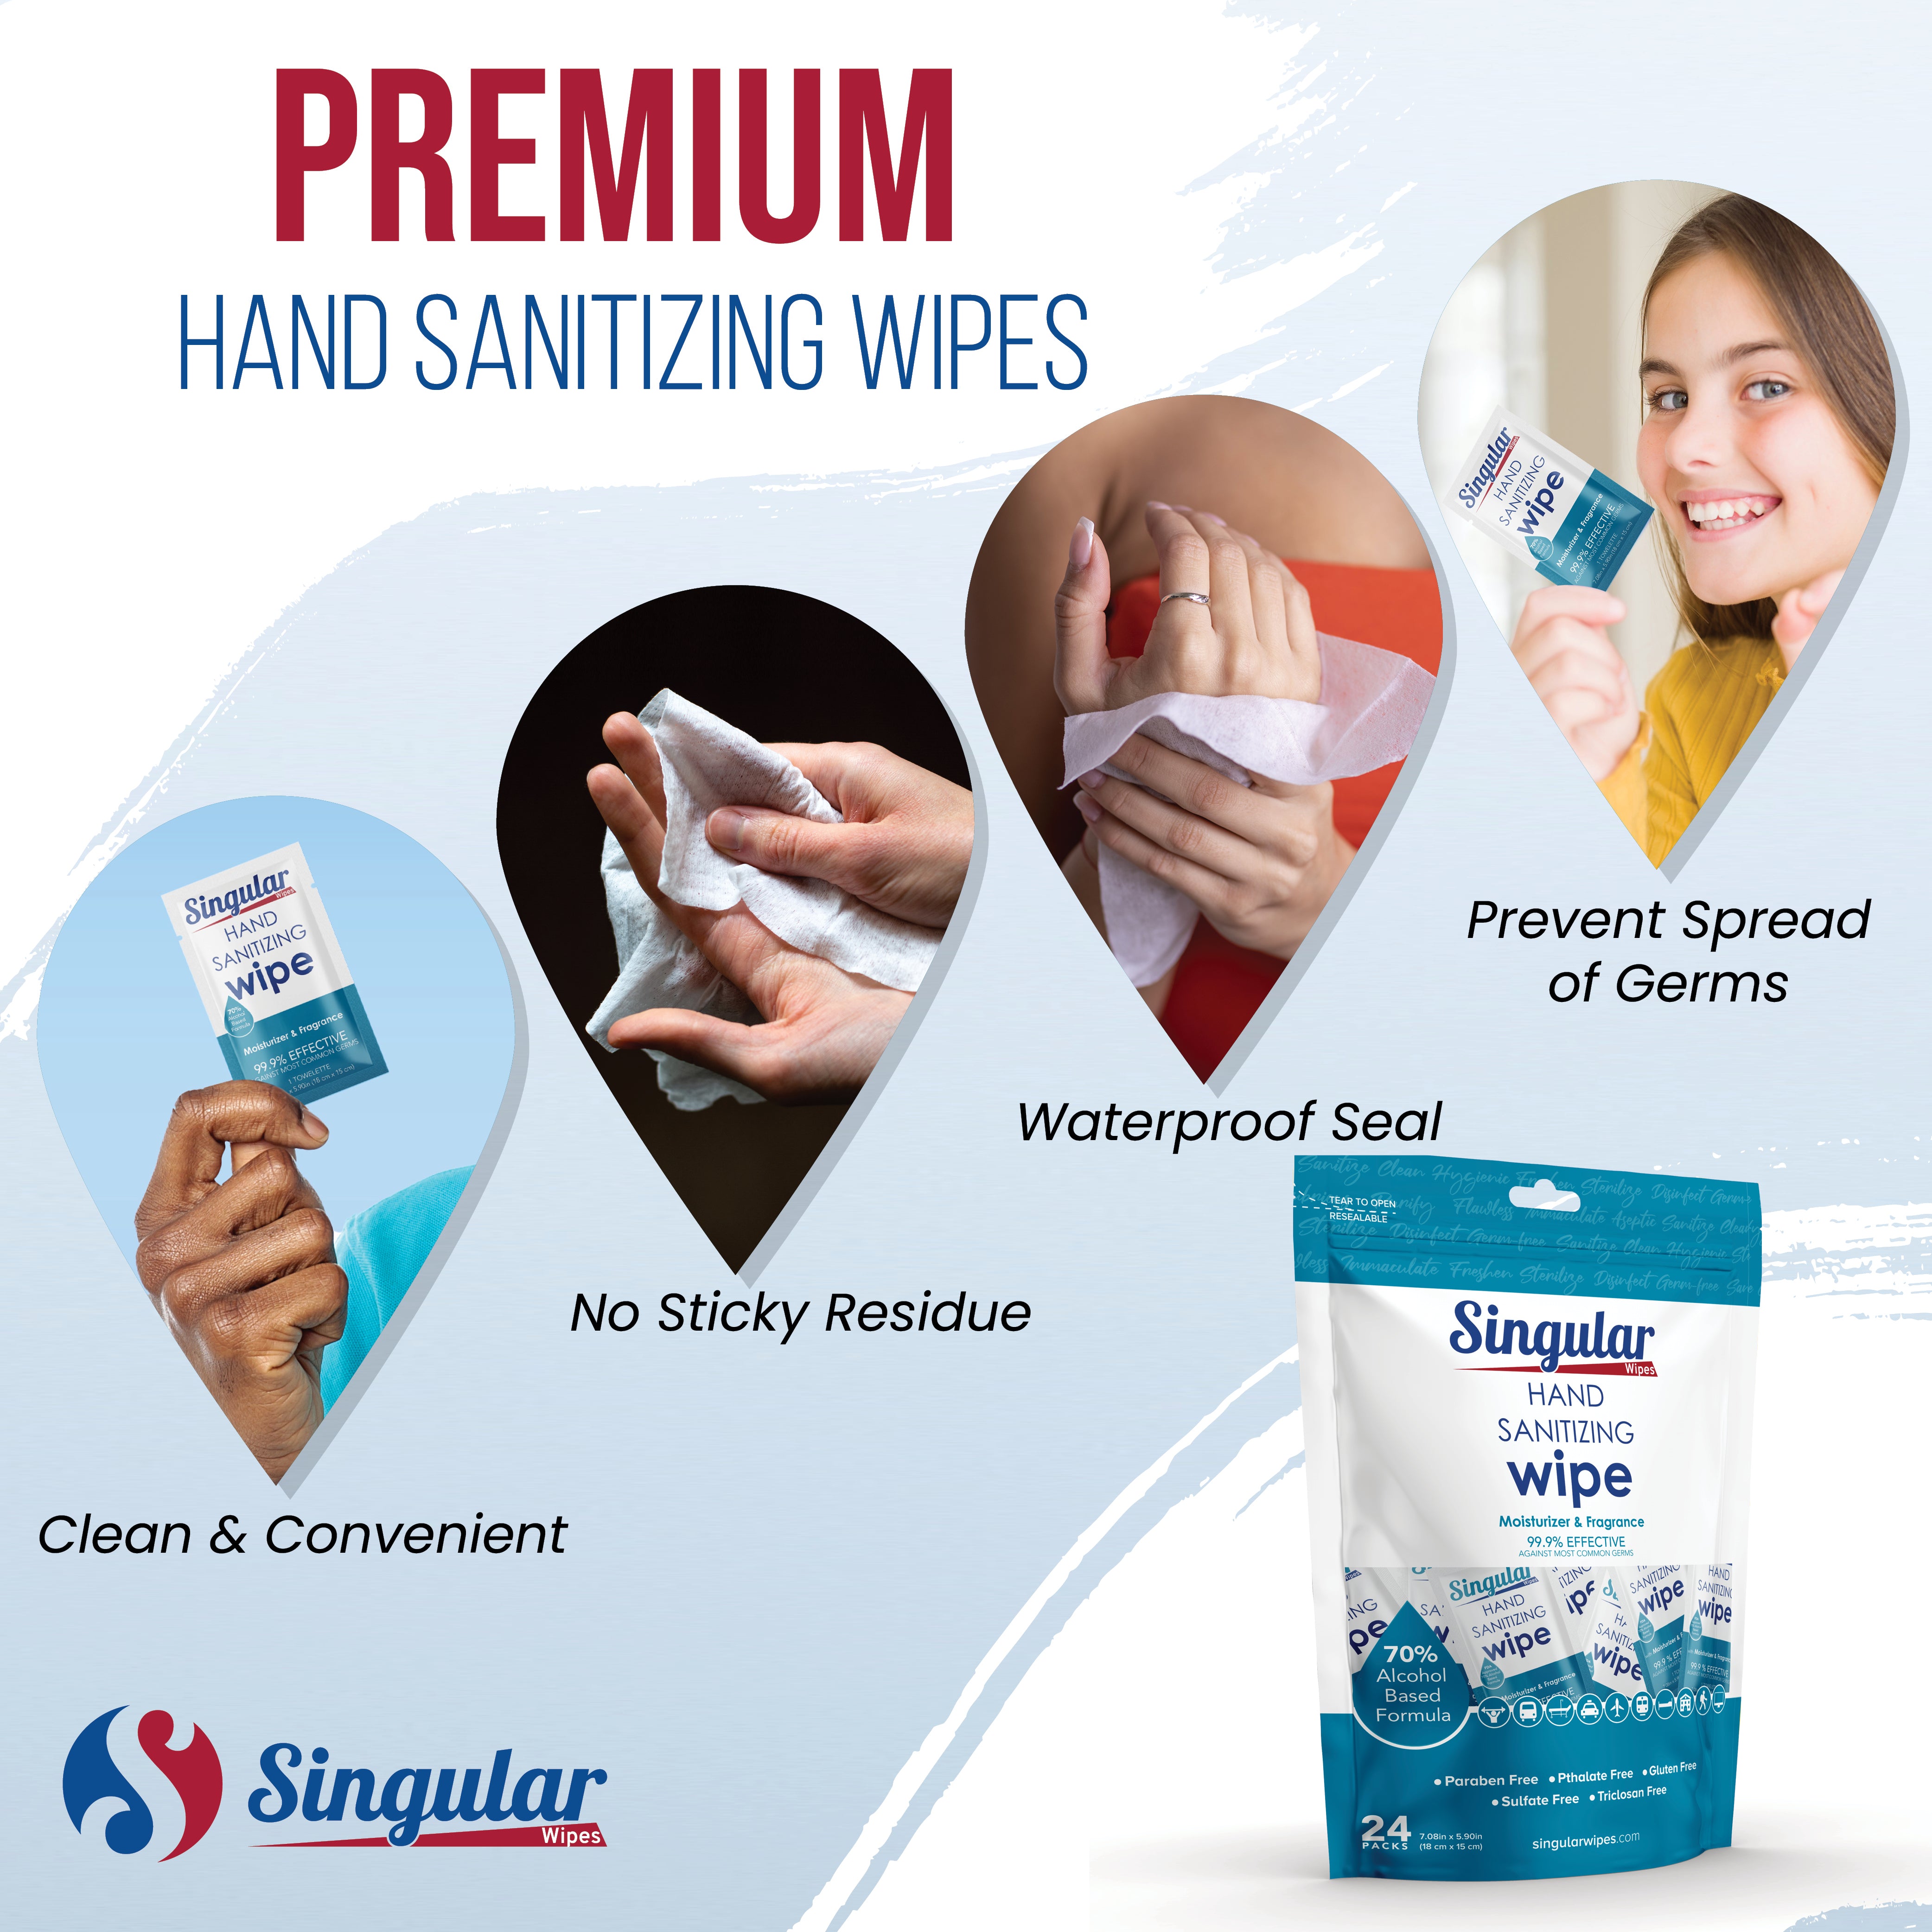 HAND SANITIZING WIPES - Individually Packed Premium Hand Sanitizing Wipes for Travel, Home, Office, School, etc. with Fresh Citrus Fragrance and Moisturizer - Made in USA (Fresh Citrus 24ct Bag)